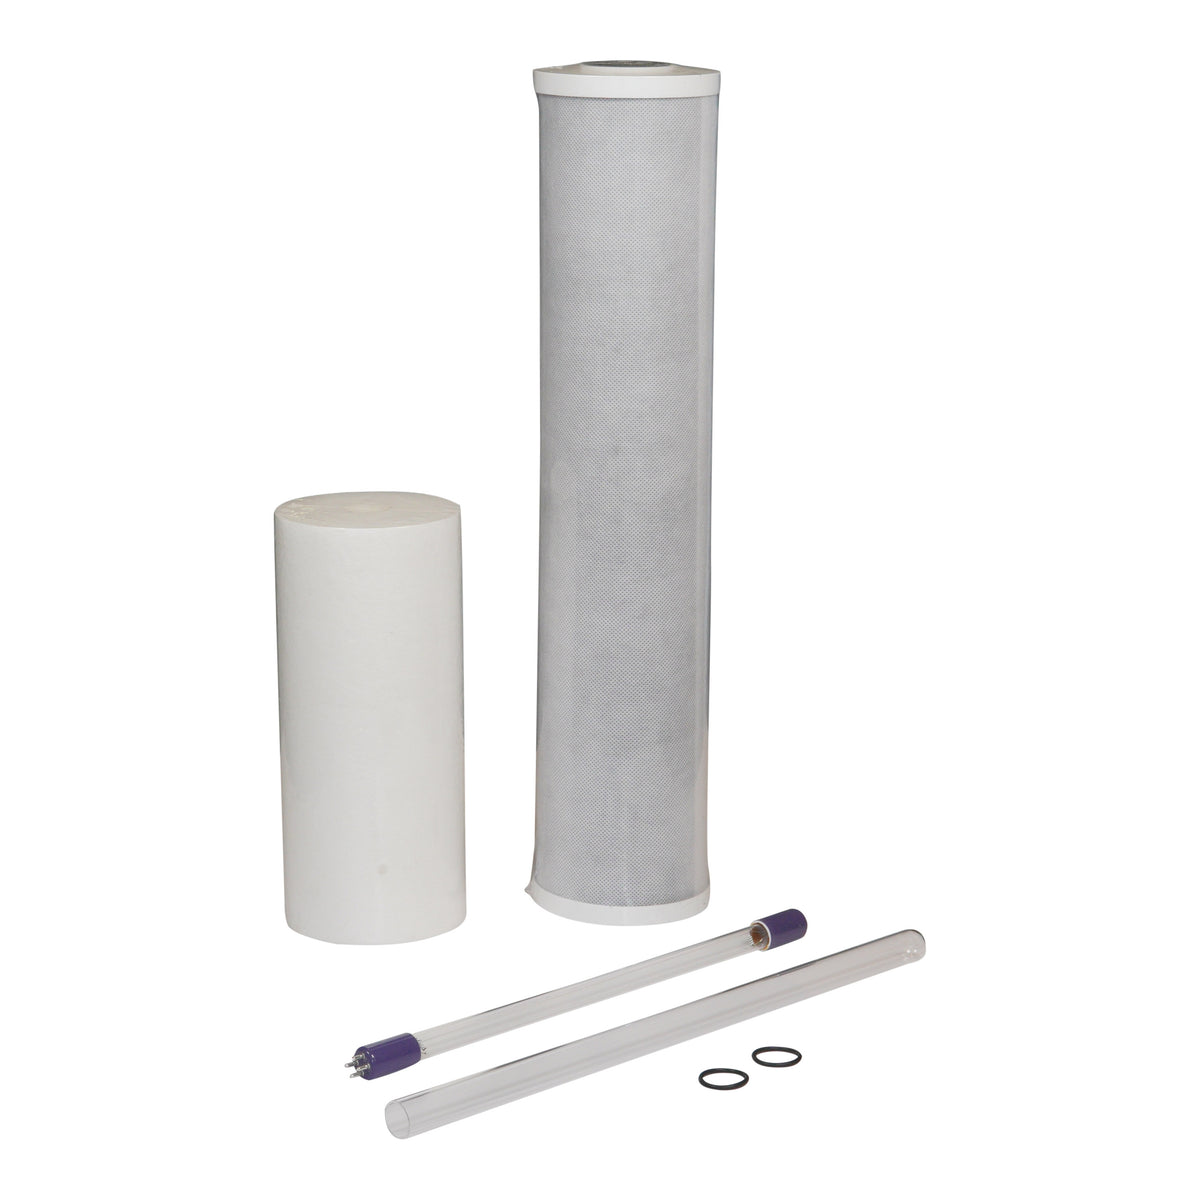 Greenway GAUVR10-20S Replacement UV Lamp, Sleeve and Filters